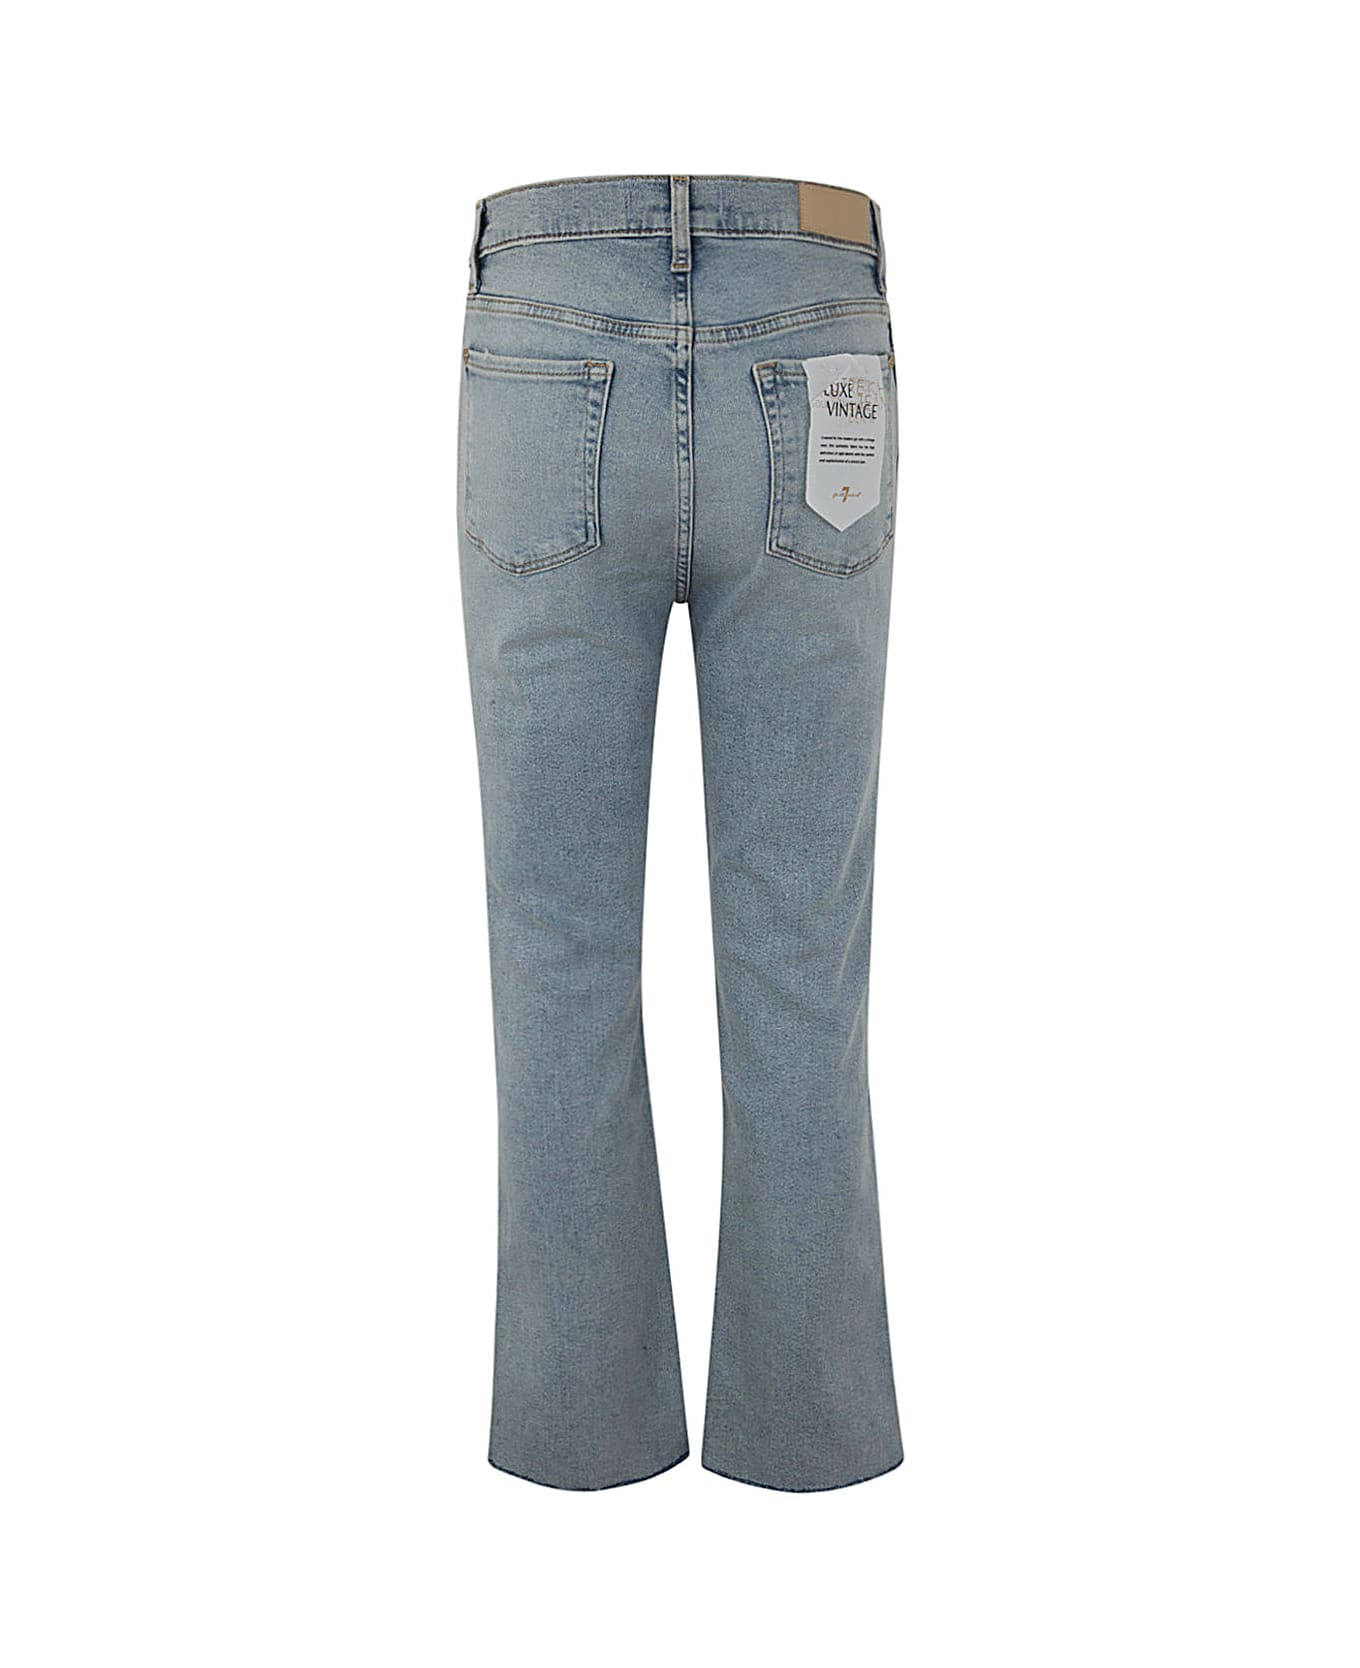 7 For All Mankind Hw Slim Kick Luxe Vintage Sunday With Distressed Hem - Light Blue デニム